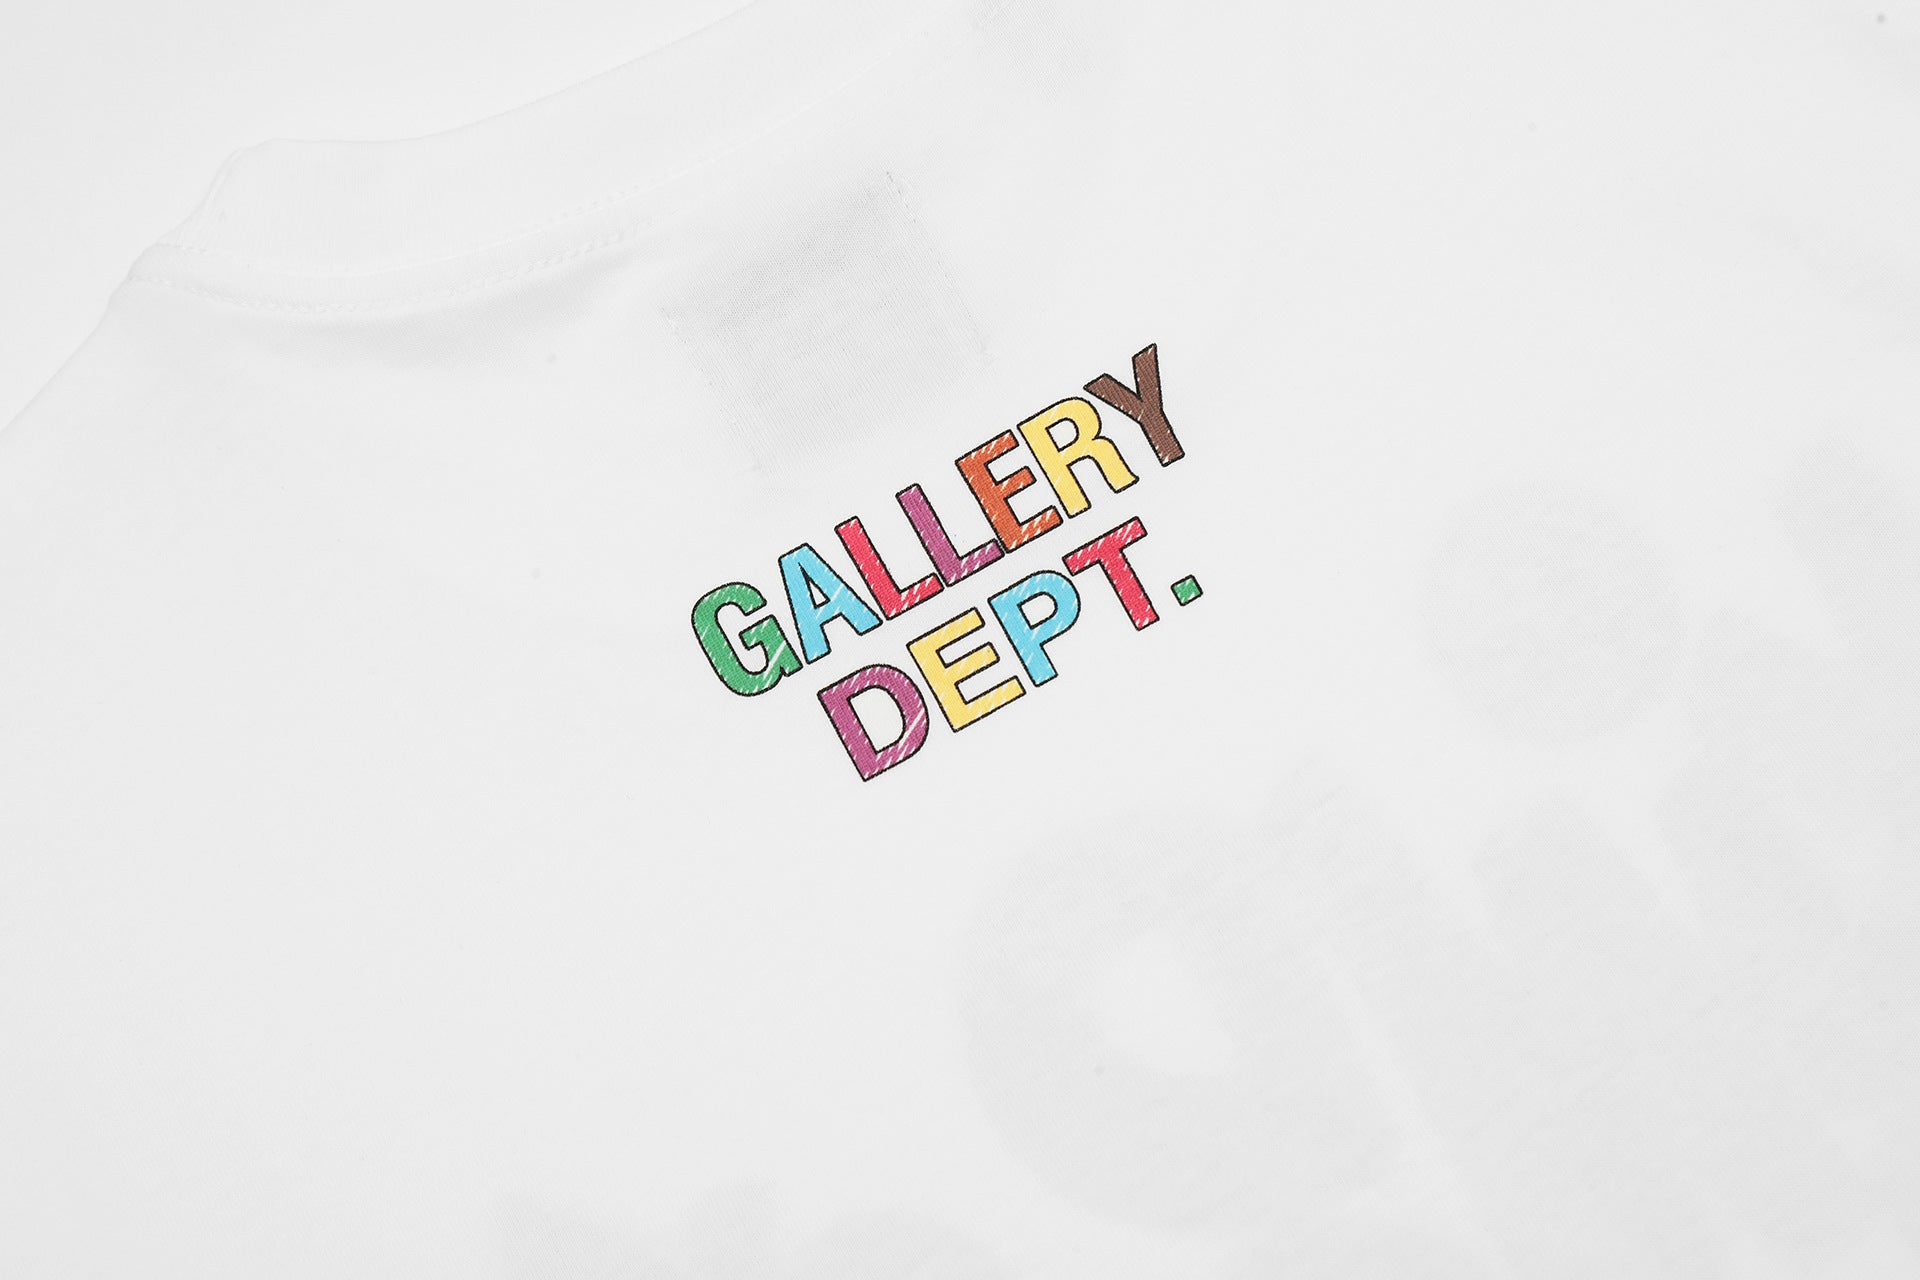 Gallery Dept crayon hand-painted colorful print T-shirt